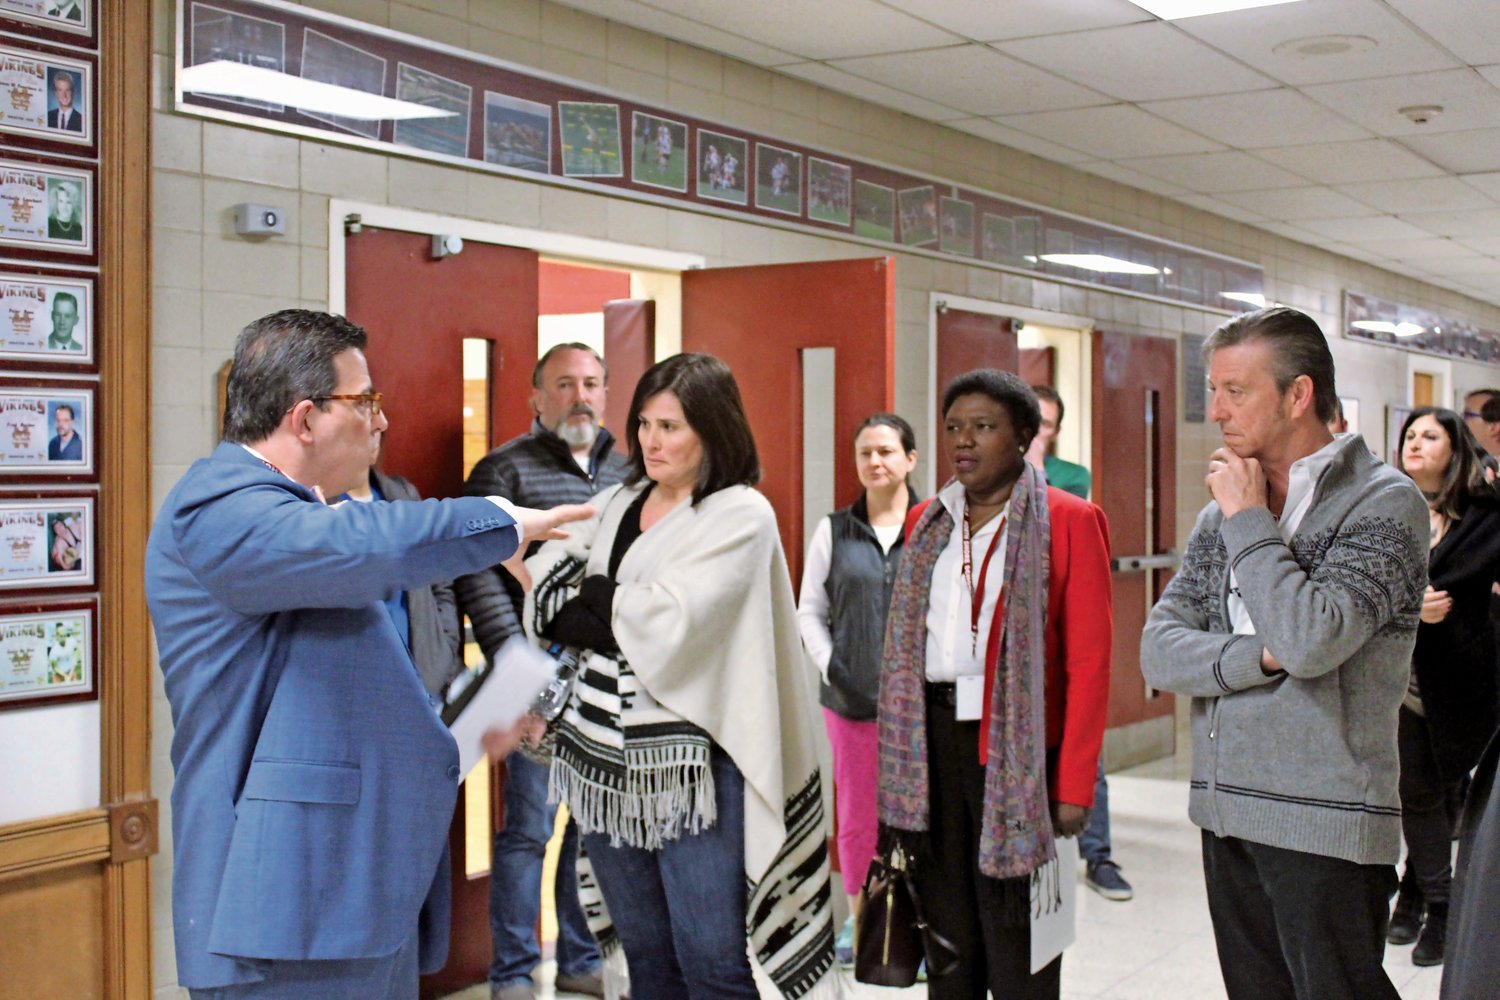 Superintendent Dr. Peter Giarrizzo, left, took community members on a tour of the district’s polling place for the annual budget vote and trustee election, which will be held, as in prior years, in the North Shore High School gym.